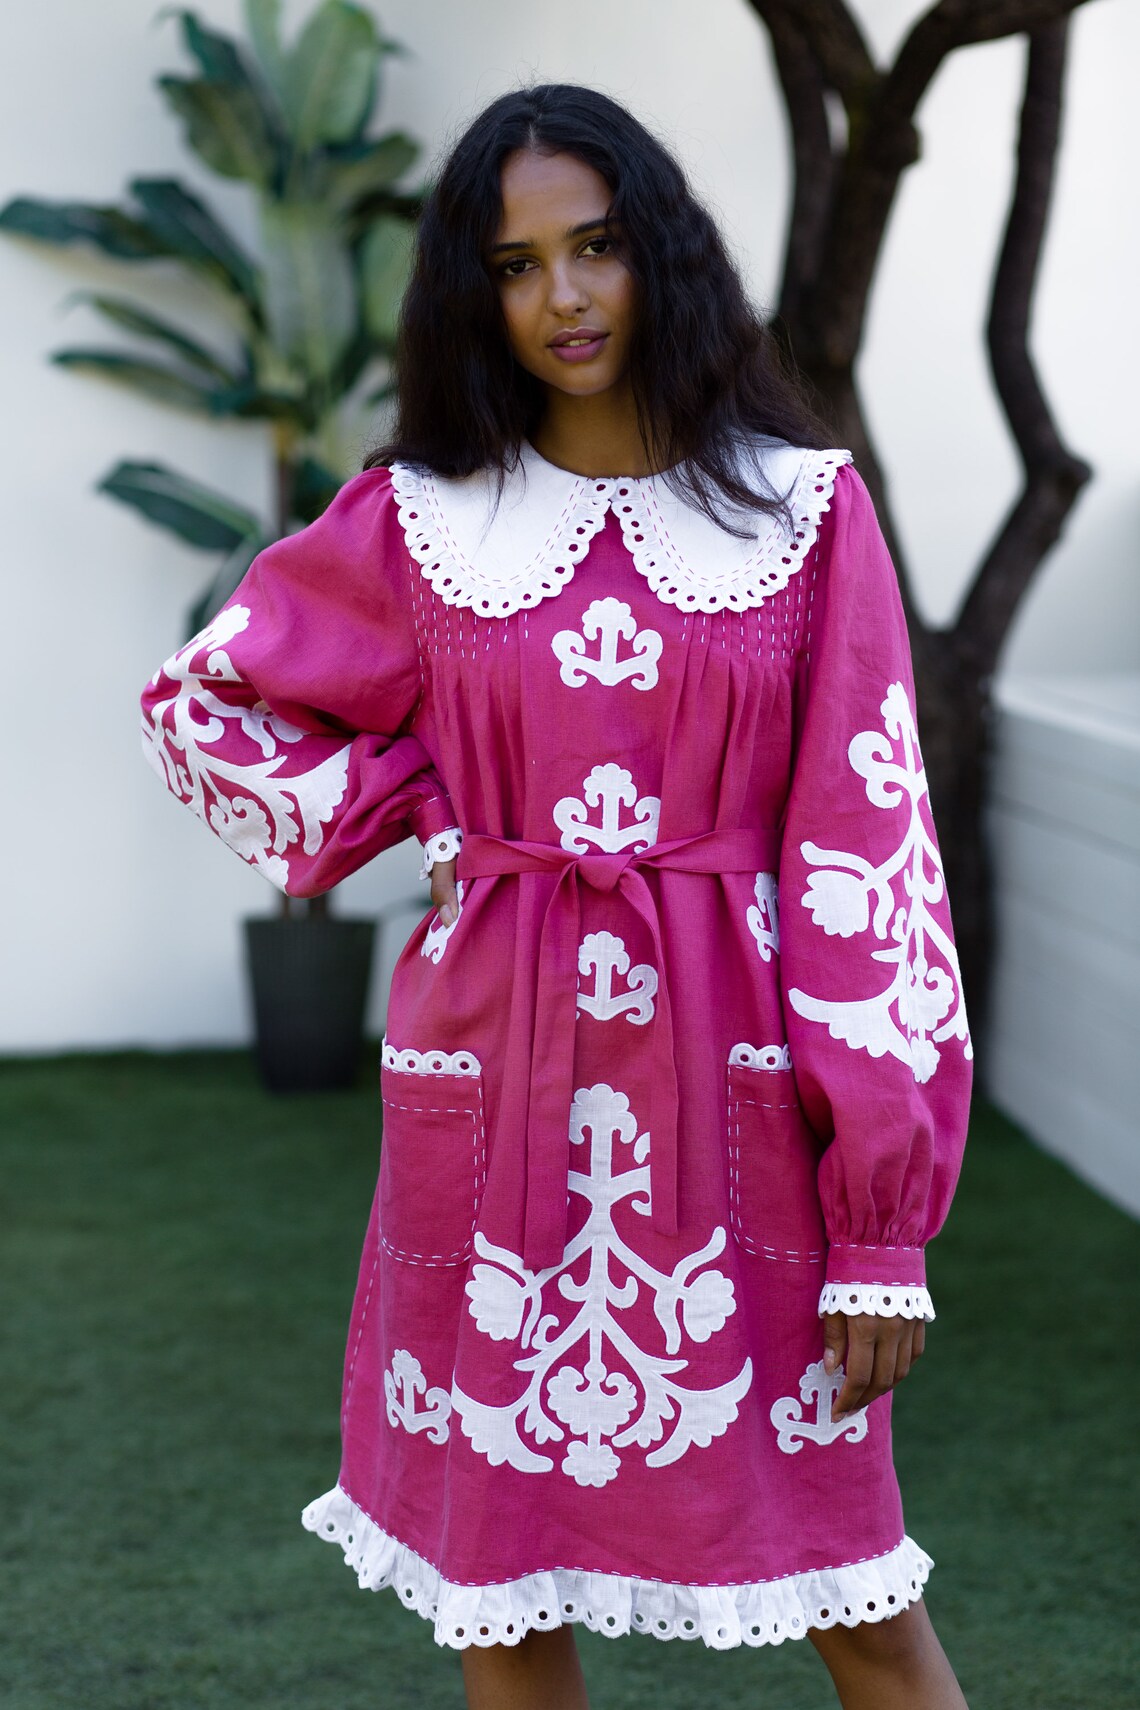 Applique embroidered dress with ethnic floral embroidery Bohemian clothing